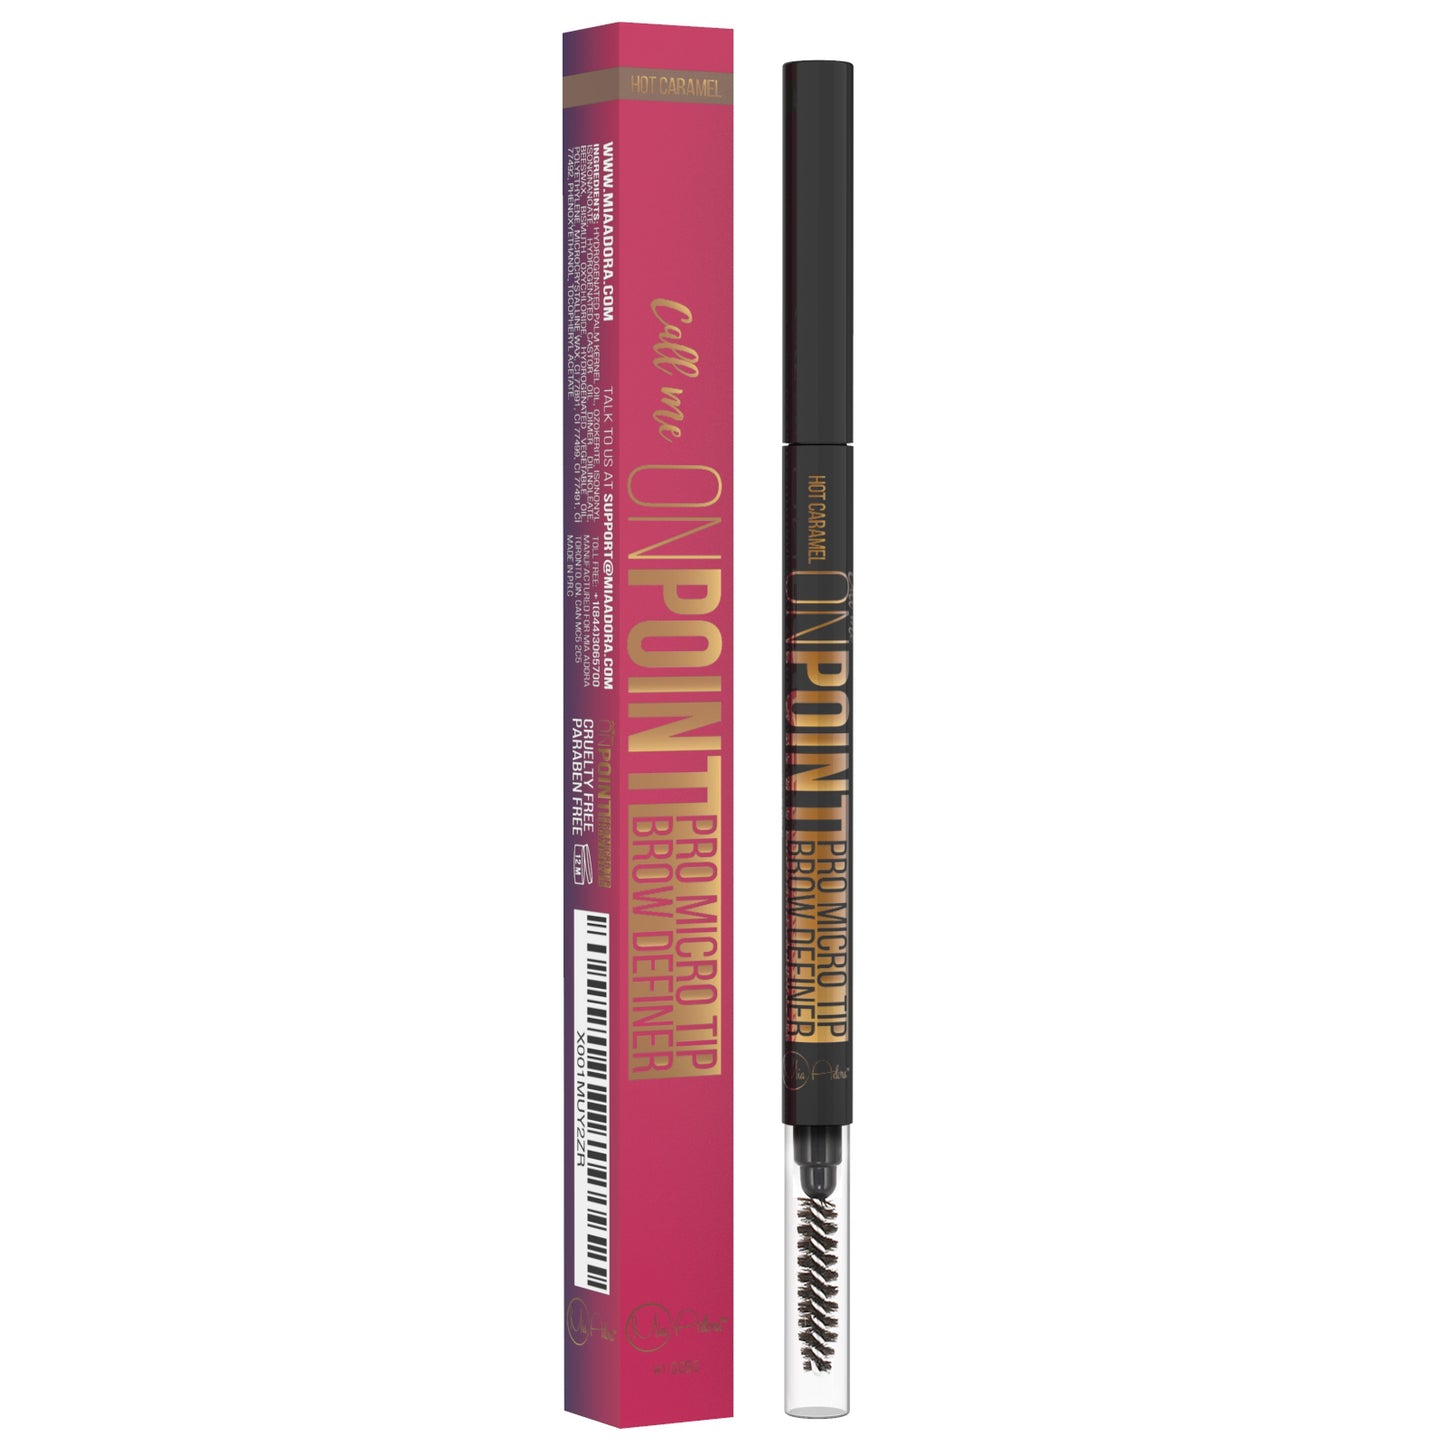 "On Point" Pro Micro Tip Eyebrow Pencil - Light Brown